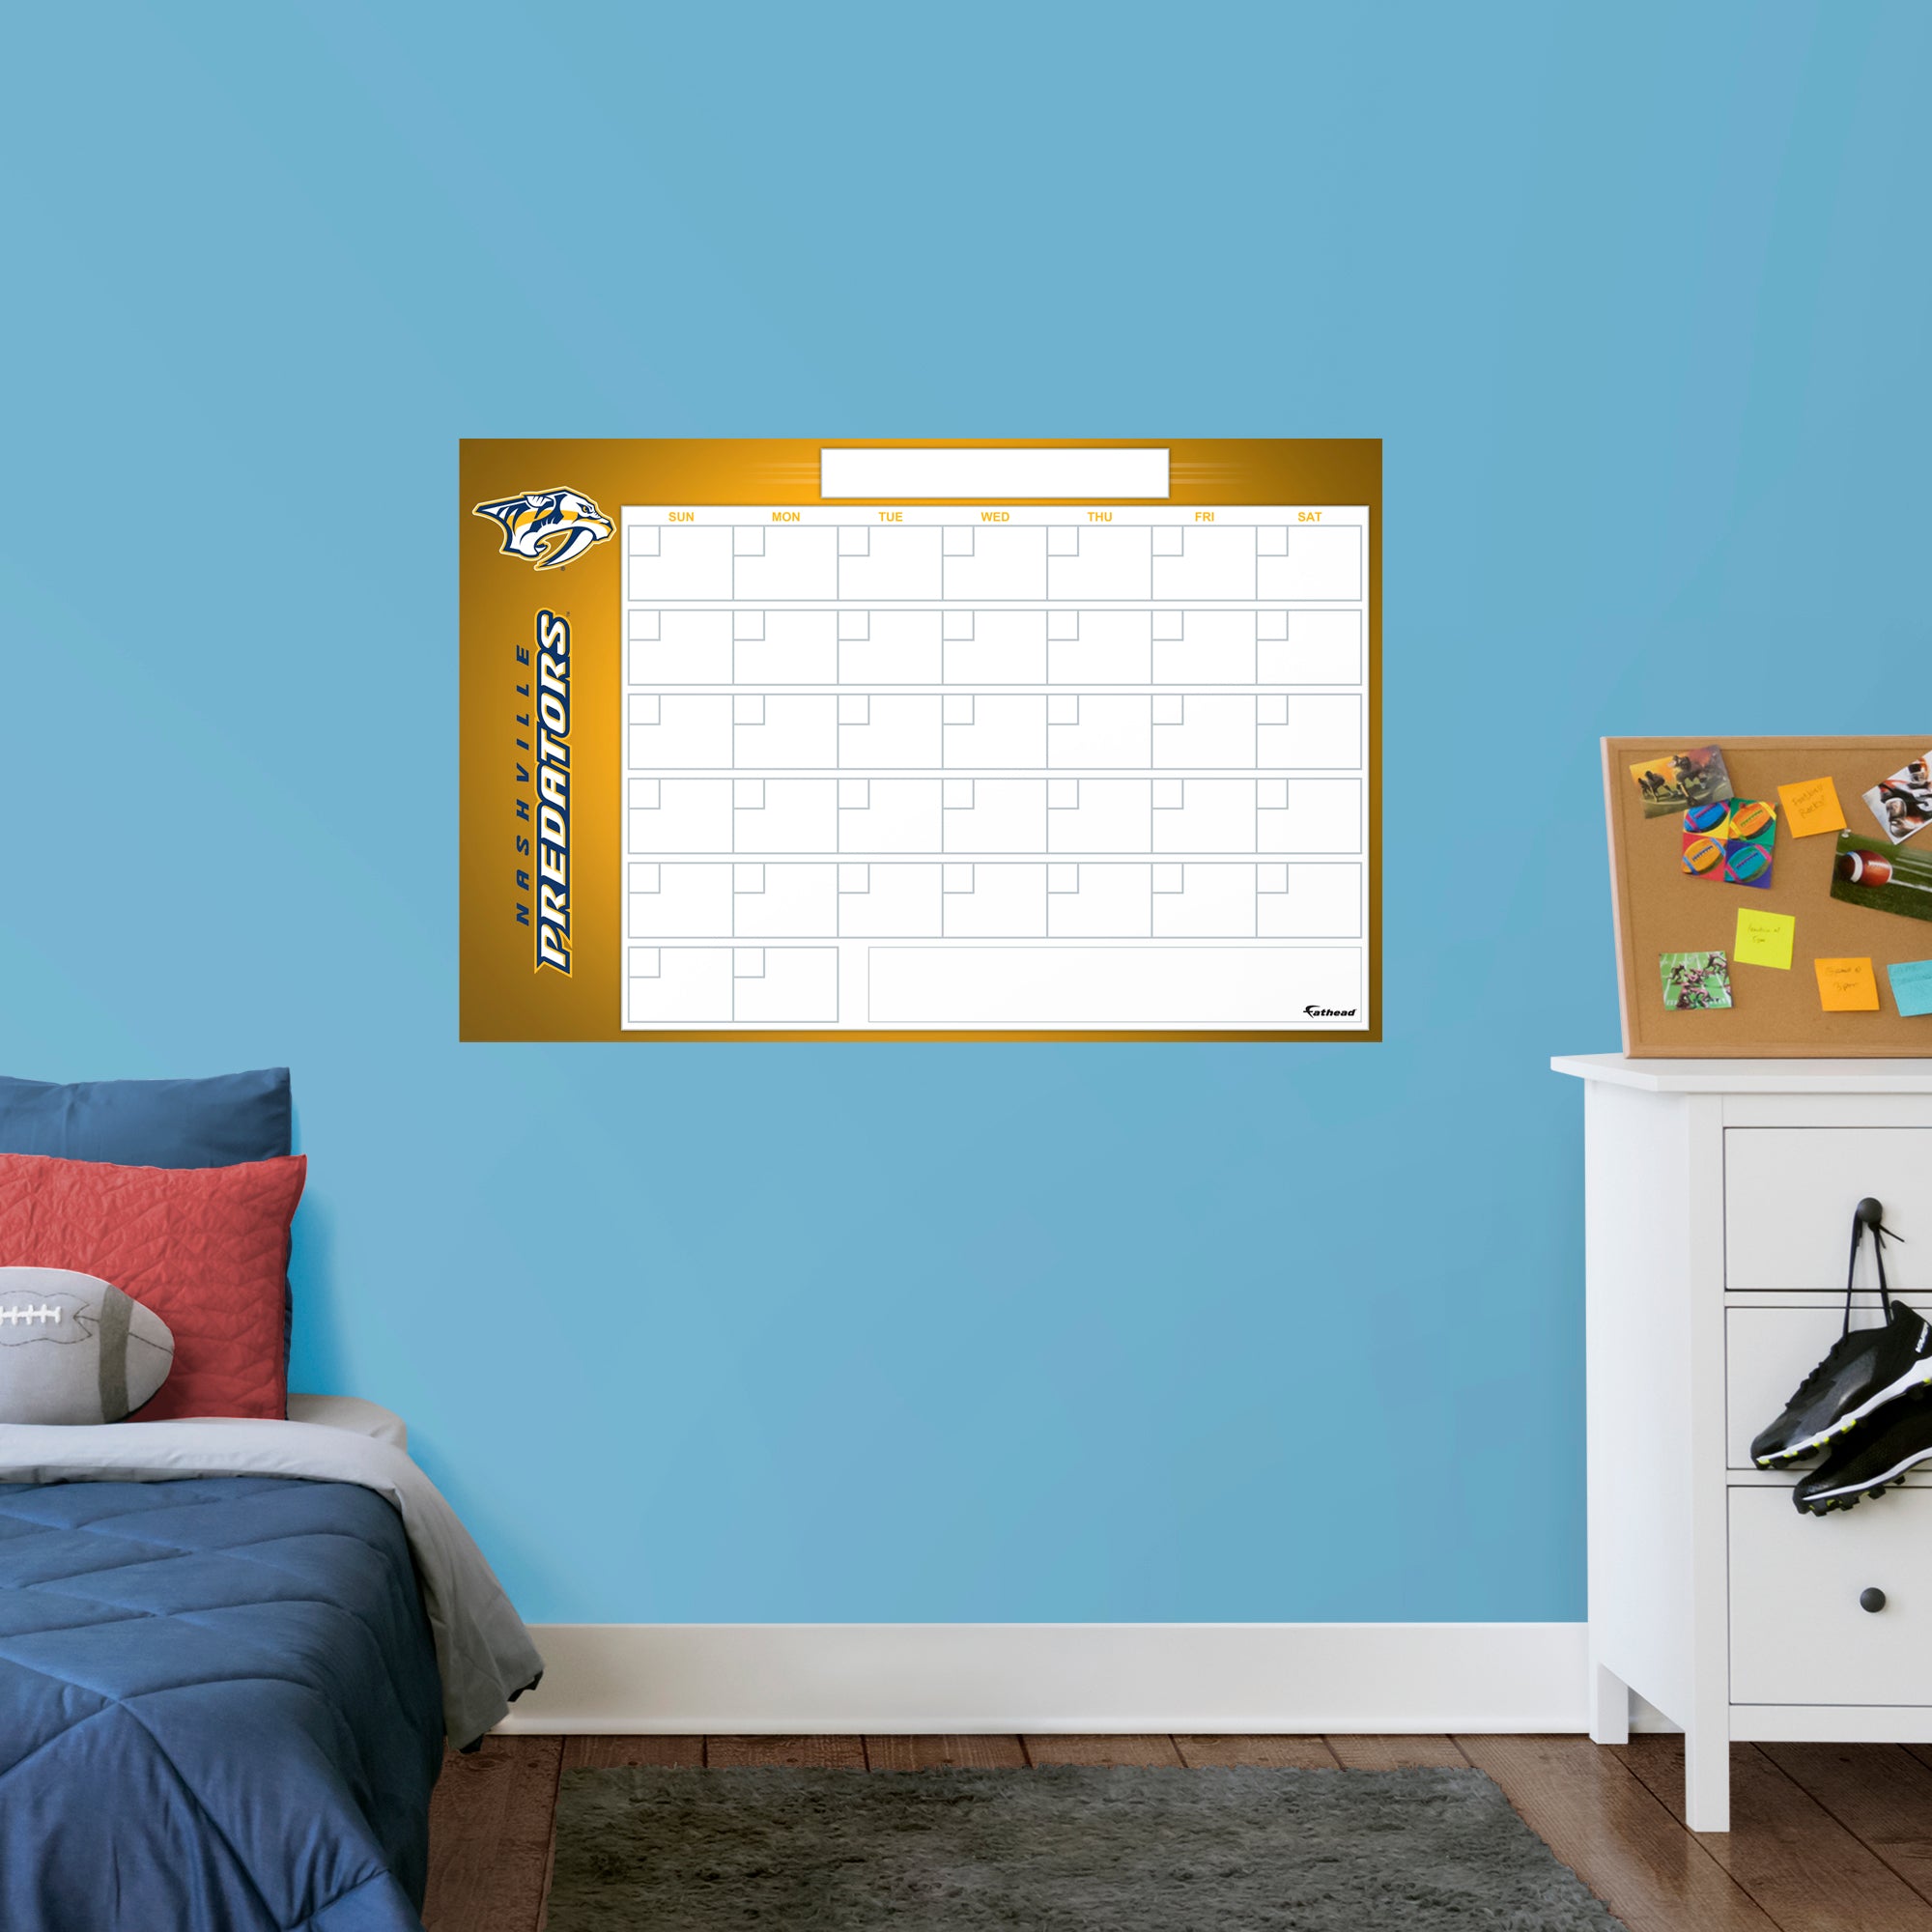 Nashville Predators Dry Erase Calendar - Officially Licensed NHL Removable Wall Decal Giant Decal (57"W x 34"H) by Fathead | Vin